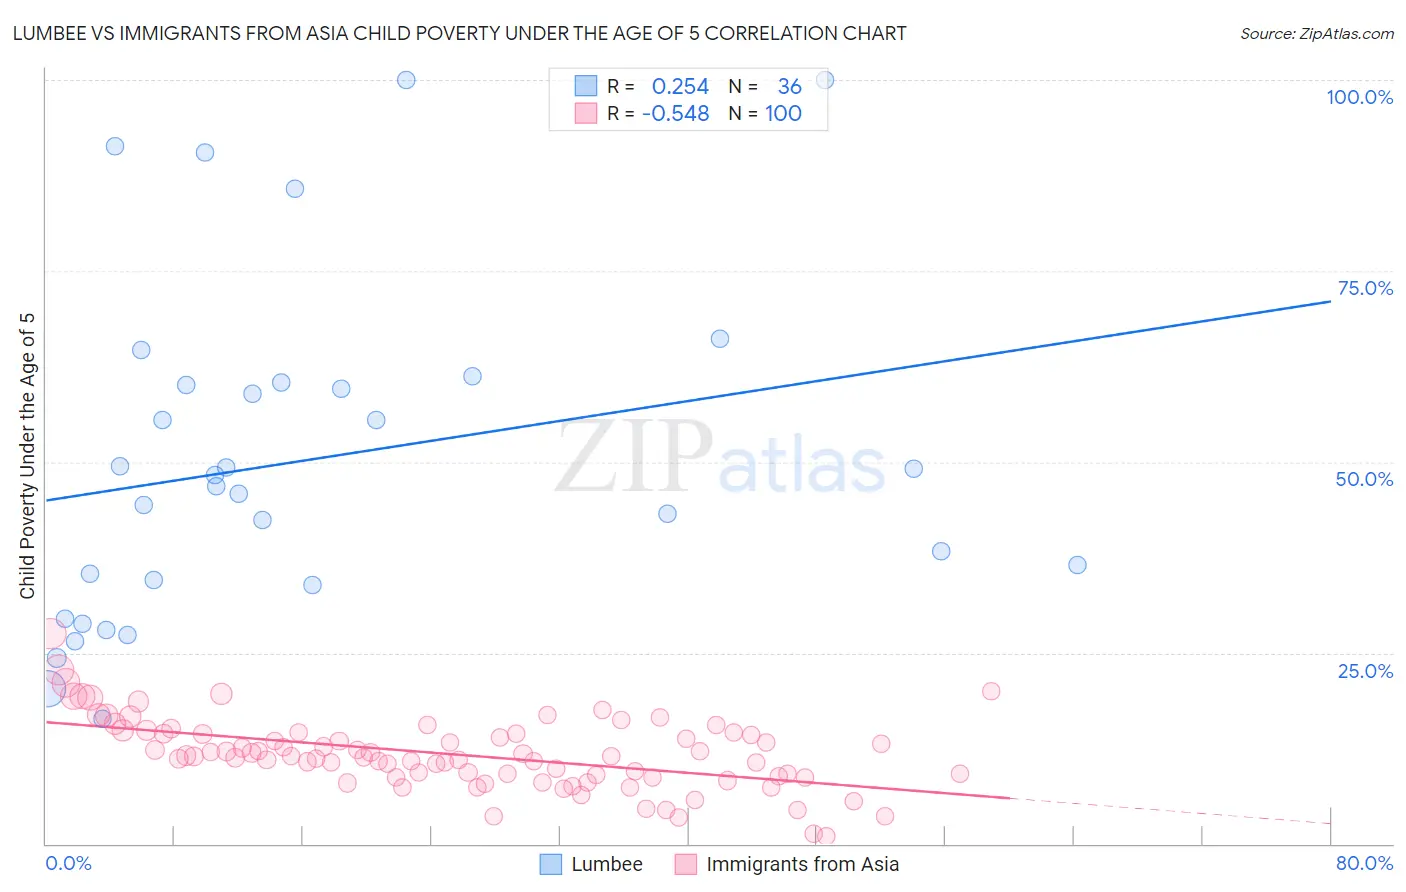 Lumbee vs Immigrants from Asia Child Poverty Under the Age of 5